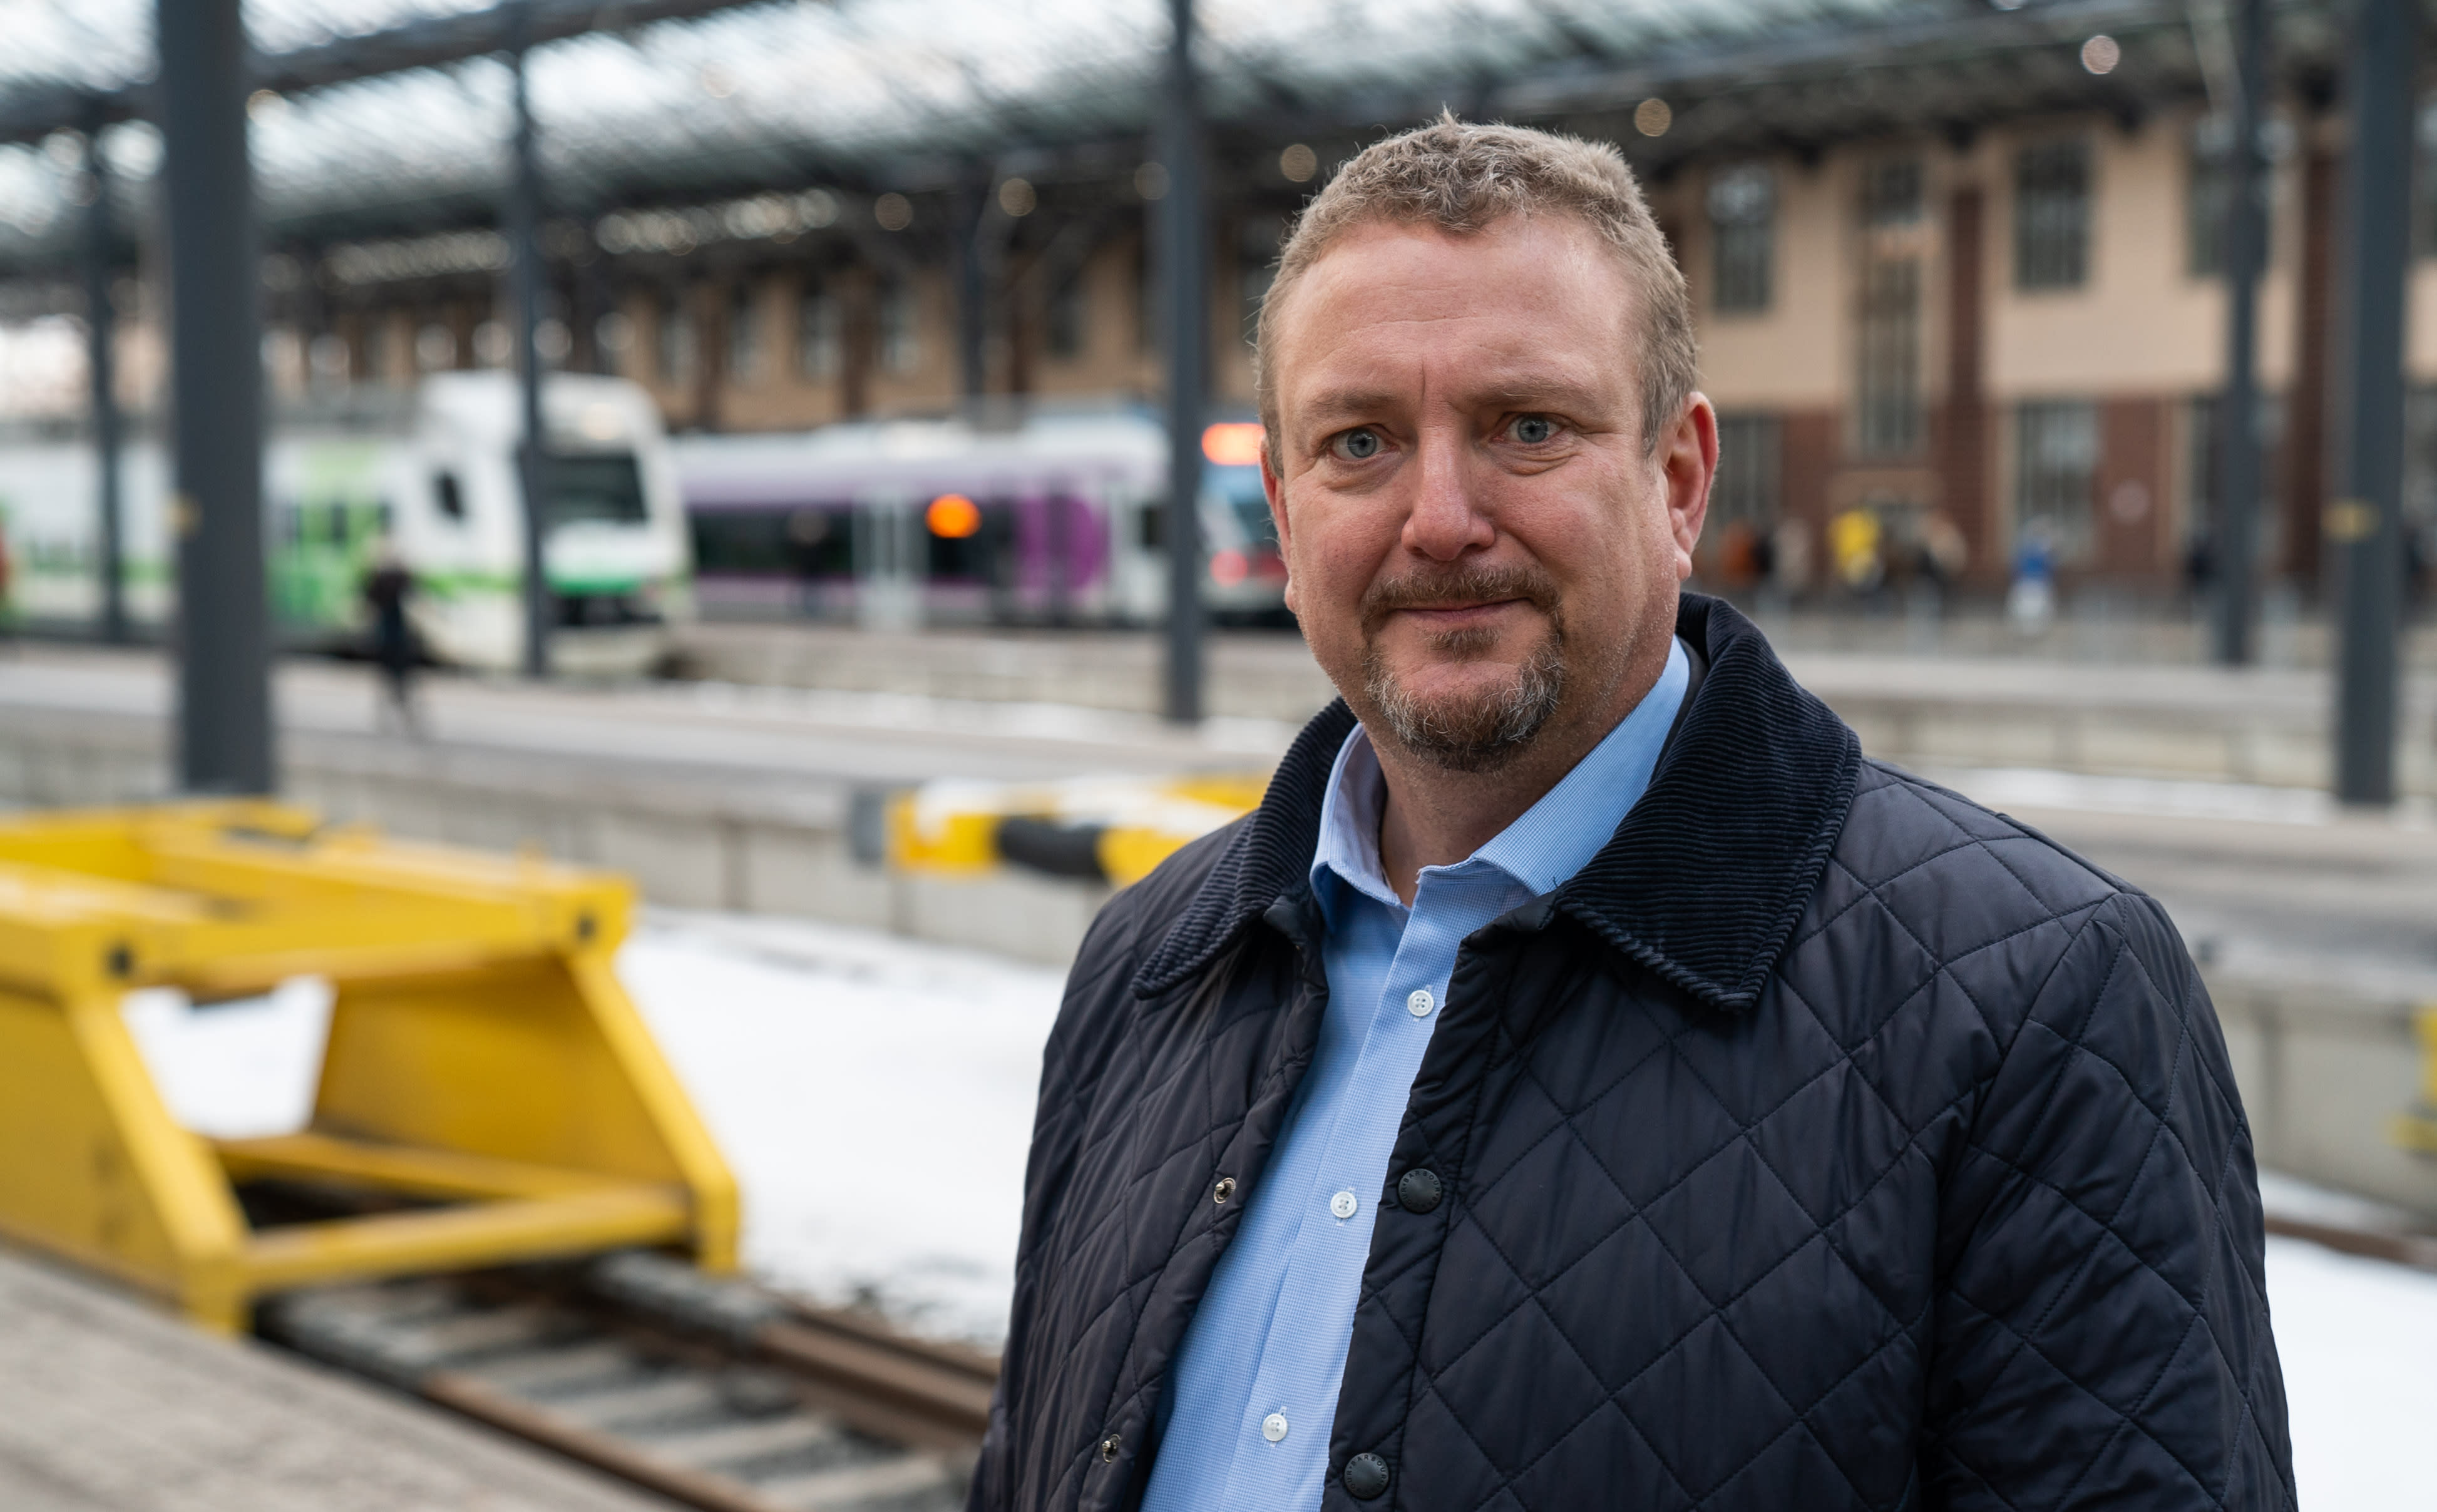 The state railway company VR fired Lauri Sipponen, President and CEO